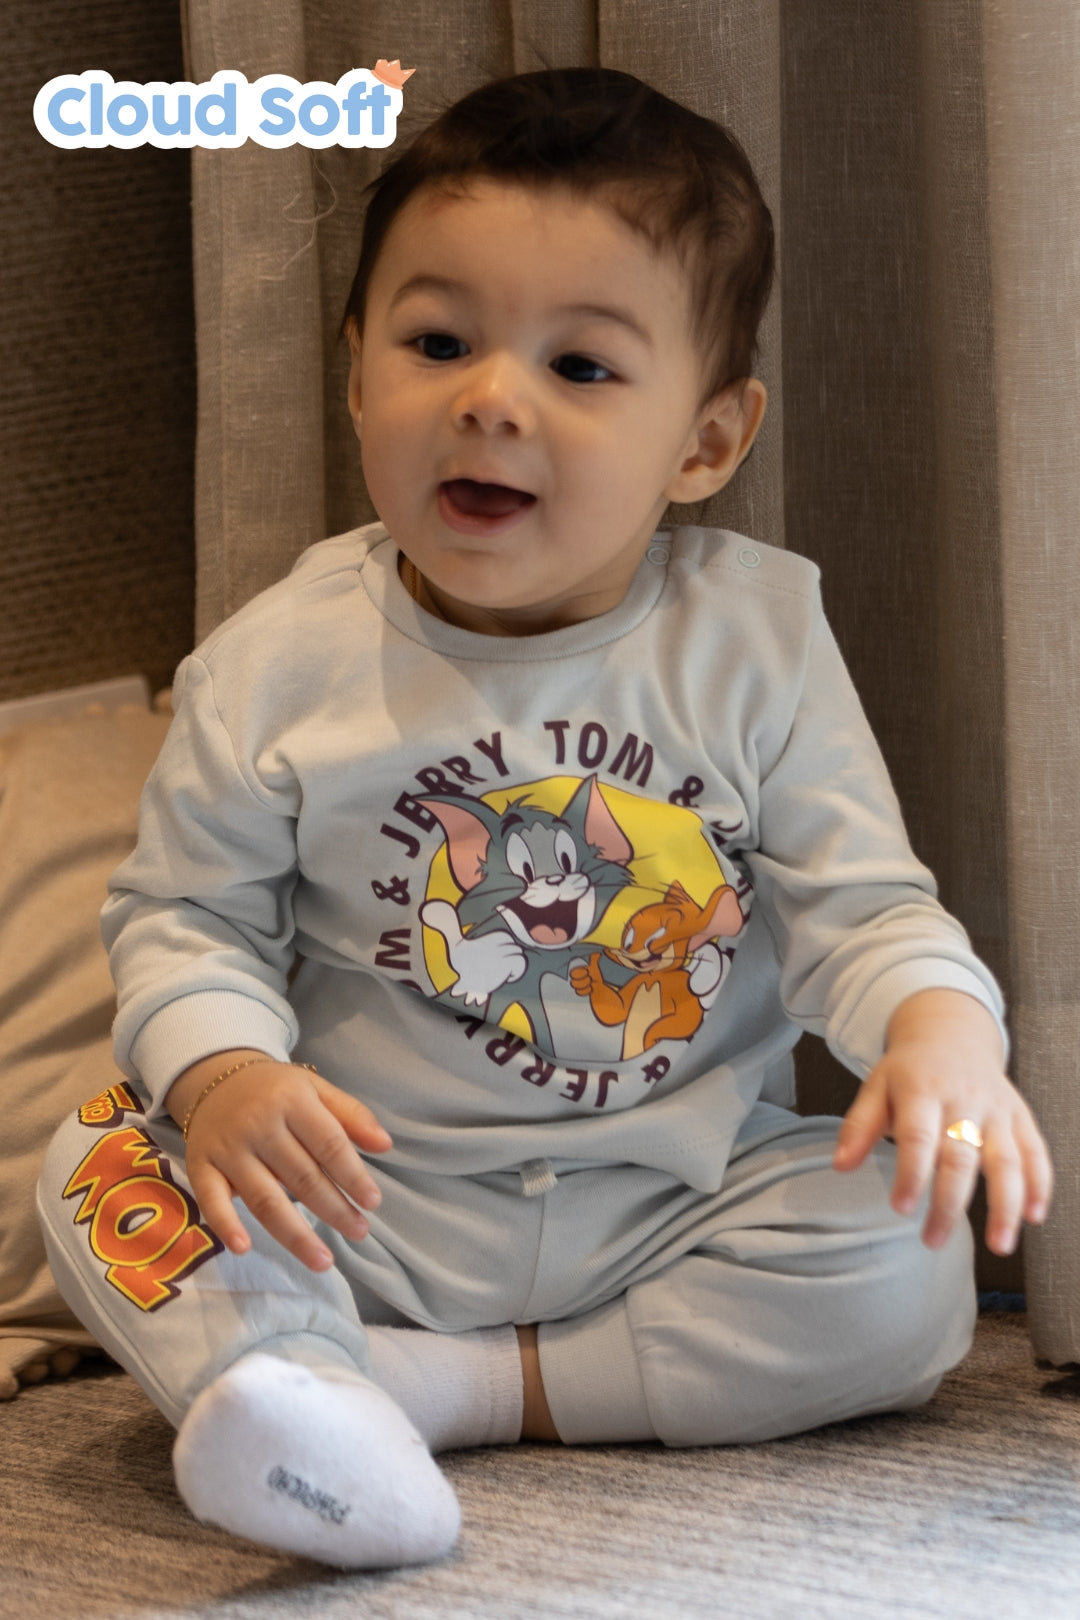 Tom & Jerry Cheers Co-ord Set for Infant